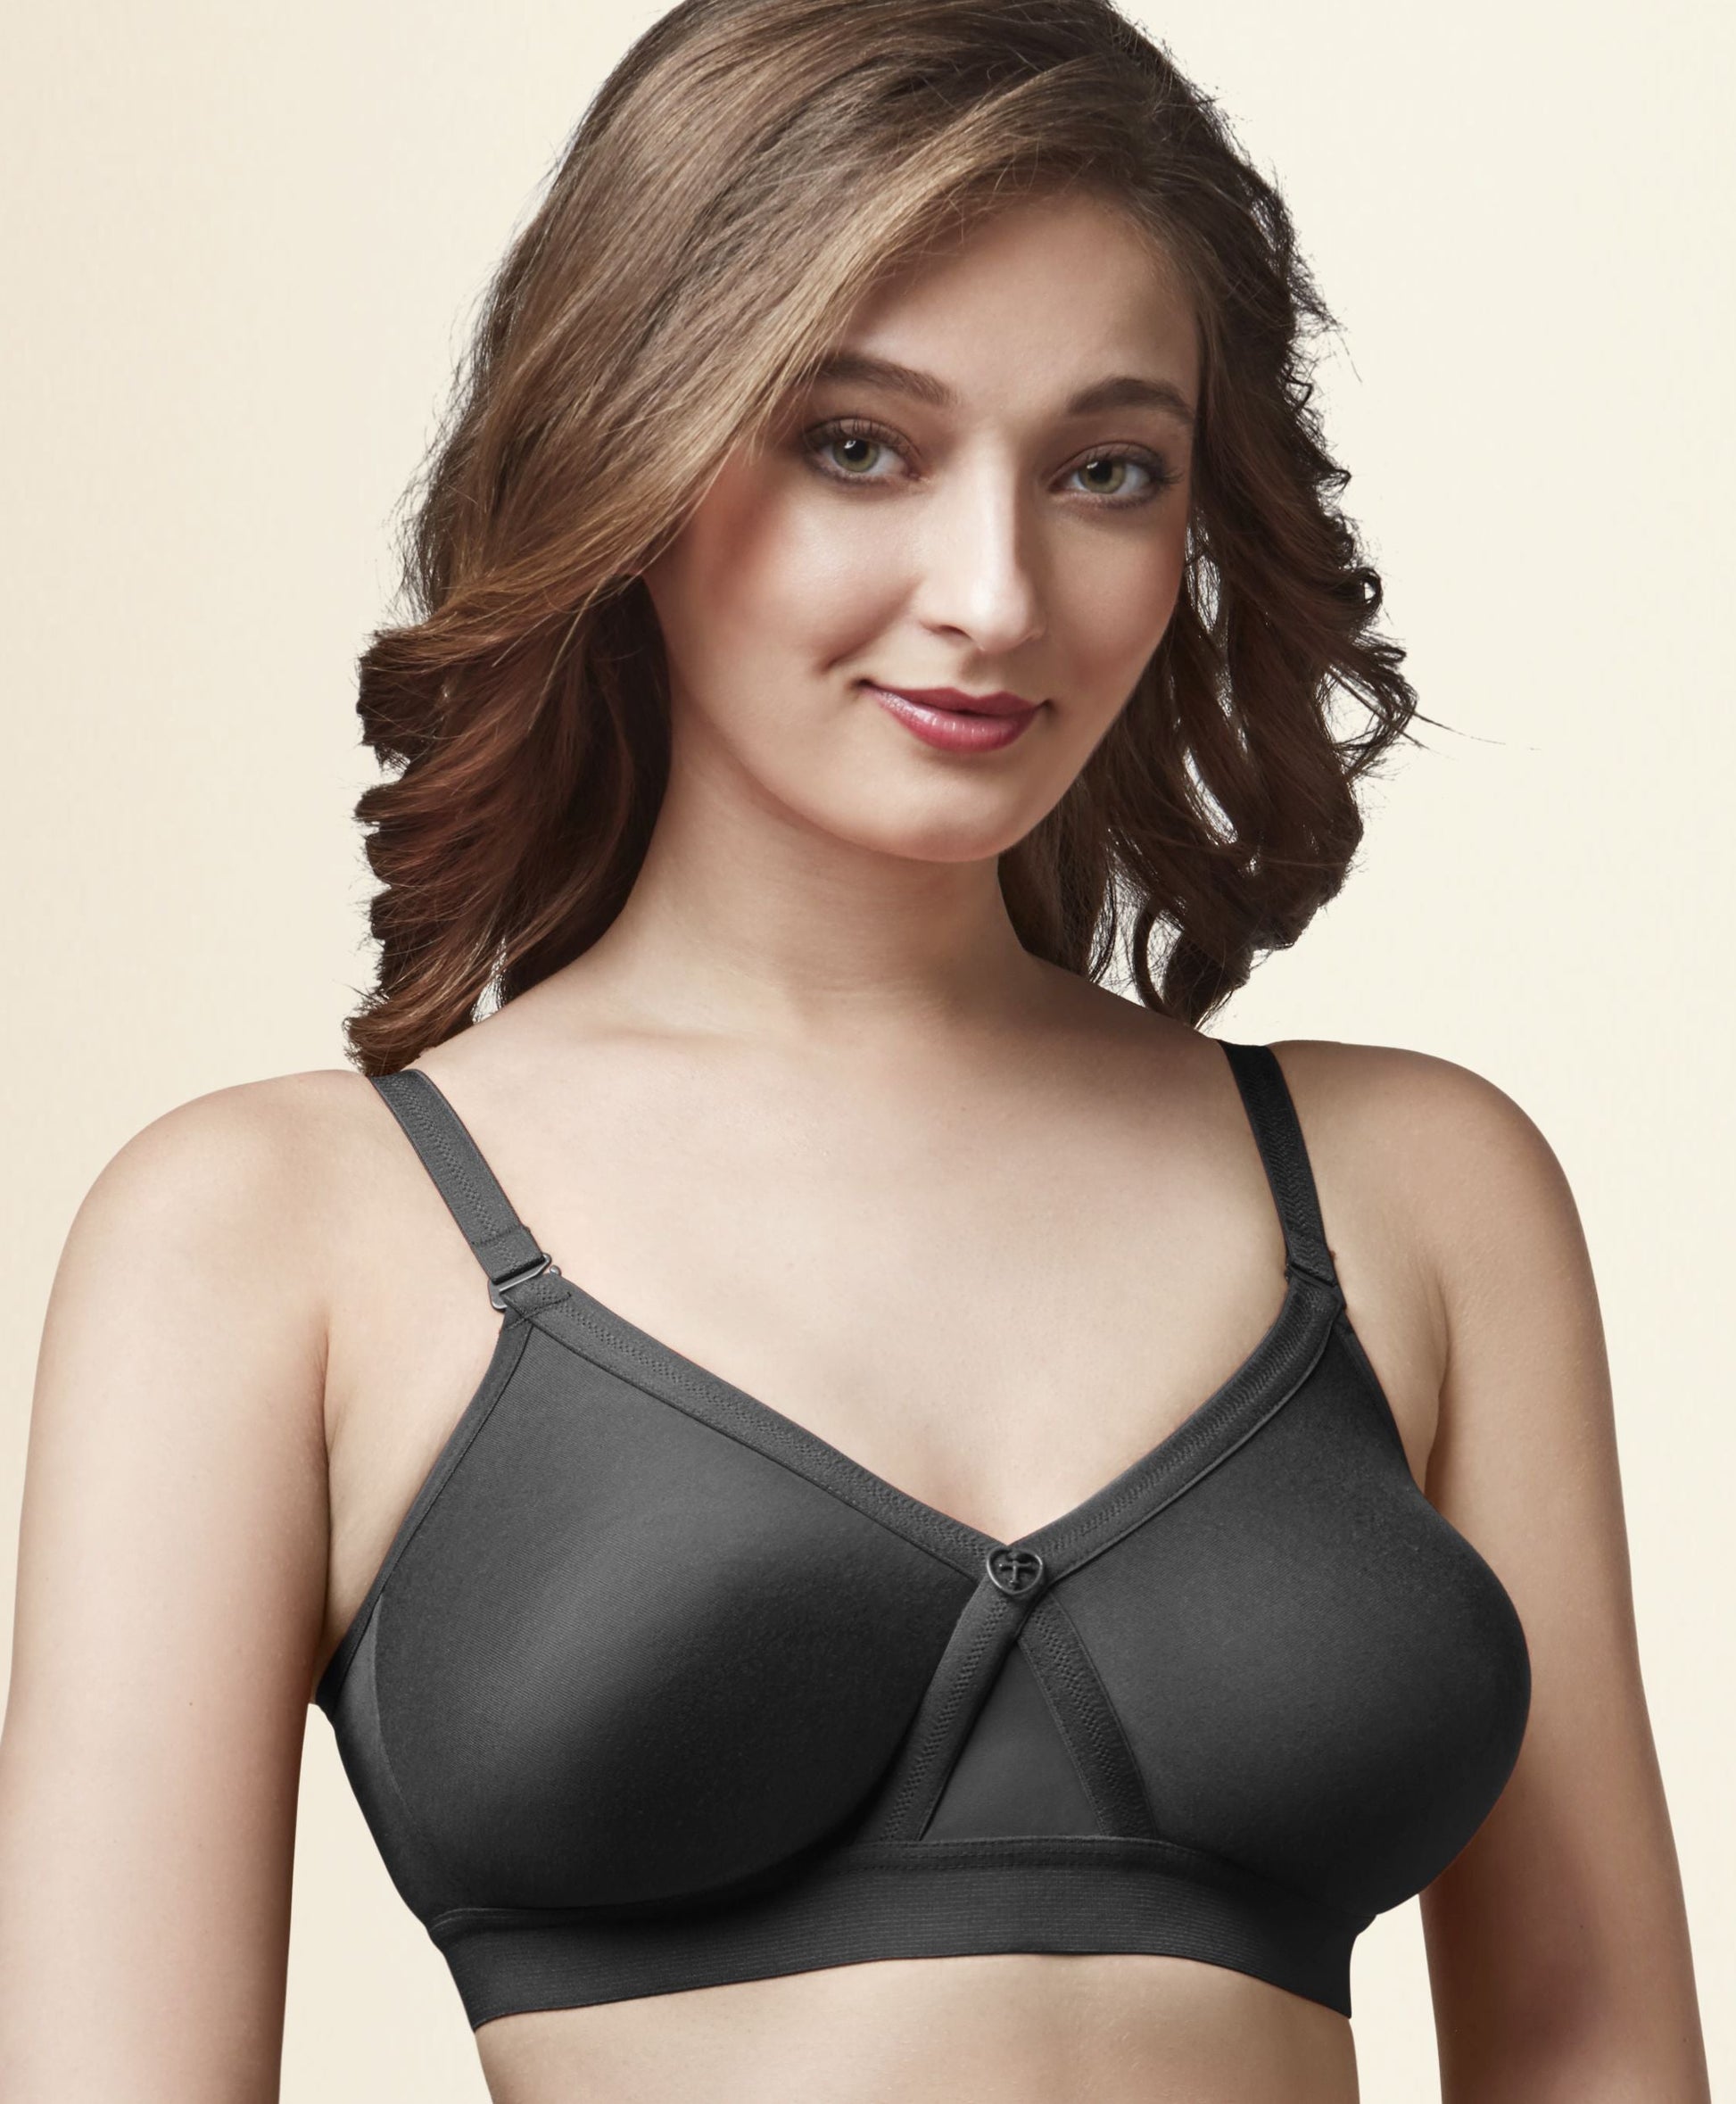 Trylo White Bra - Get Best Price from Manufacturers & Suppliers in